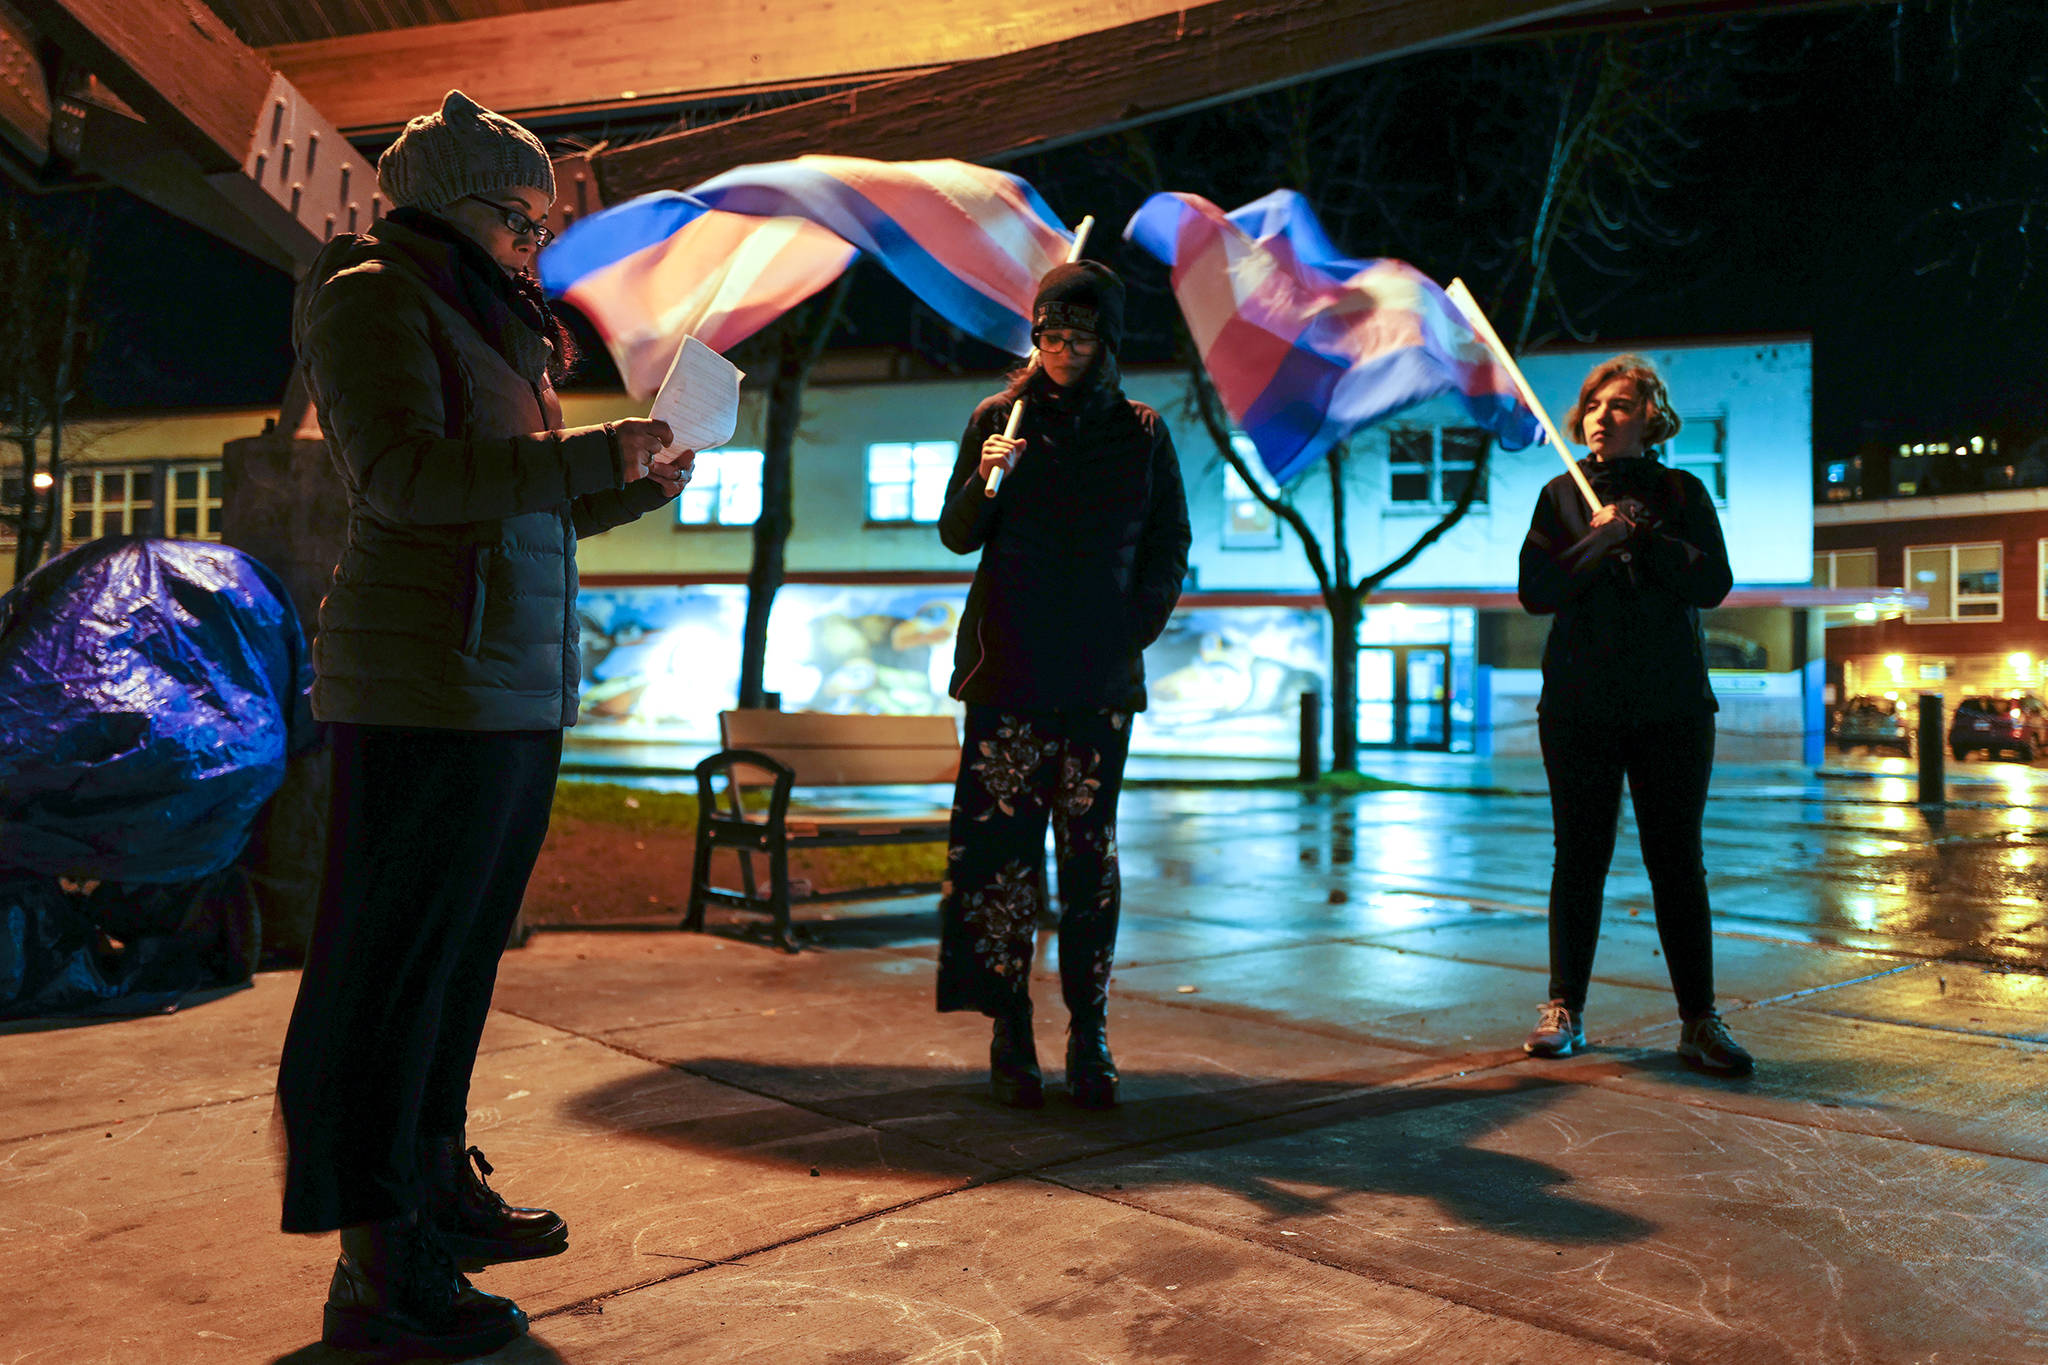 Southeast Alaska LBTQ+ Alliance Board Chair JoLynn Shriber reads a list the names of killed transgender people as Thunder Mountain High School students Kyla Stevens, center, and Laila Williams hold flags in the wind during a transgender remembrance at Marine Park on Wednesday, Nov. 20, 2019. (Michael Penn | Juneau Empire)